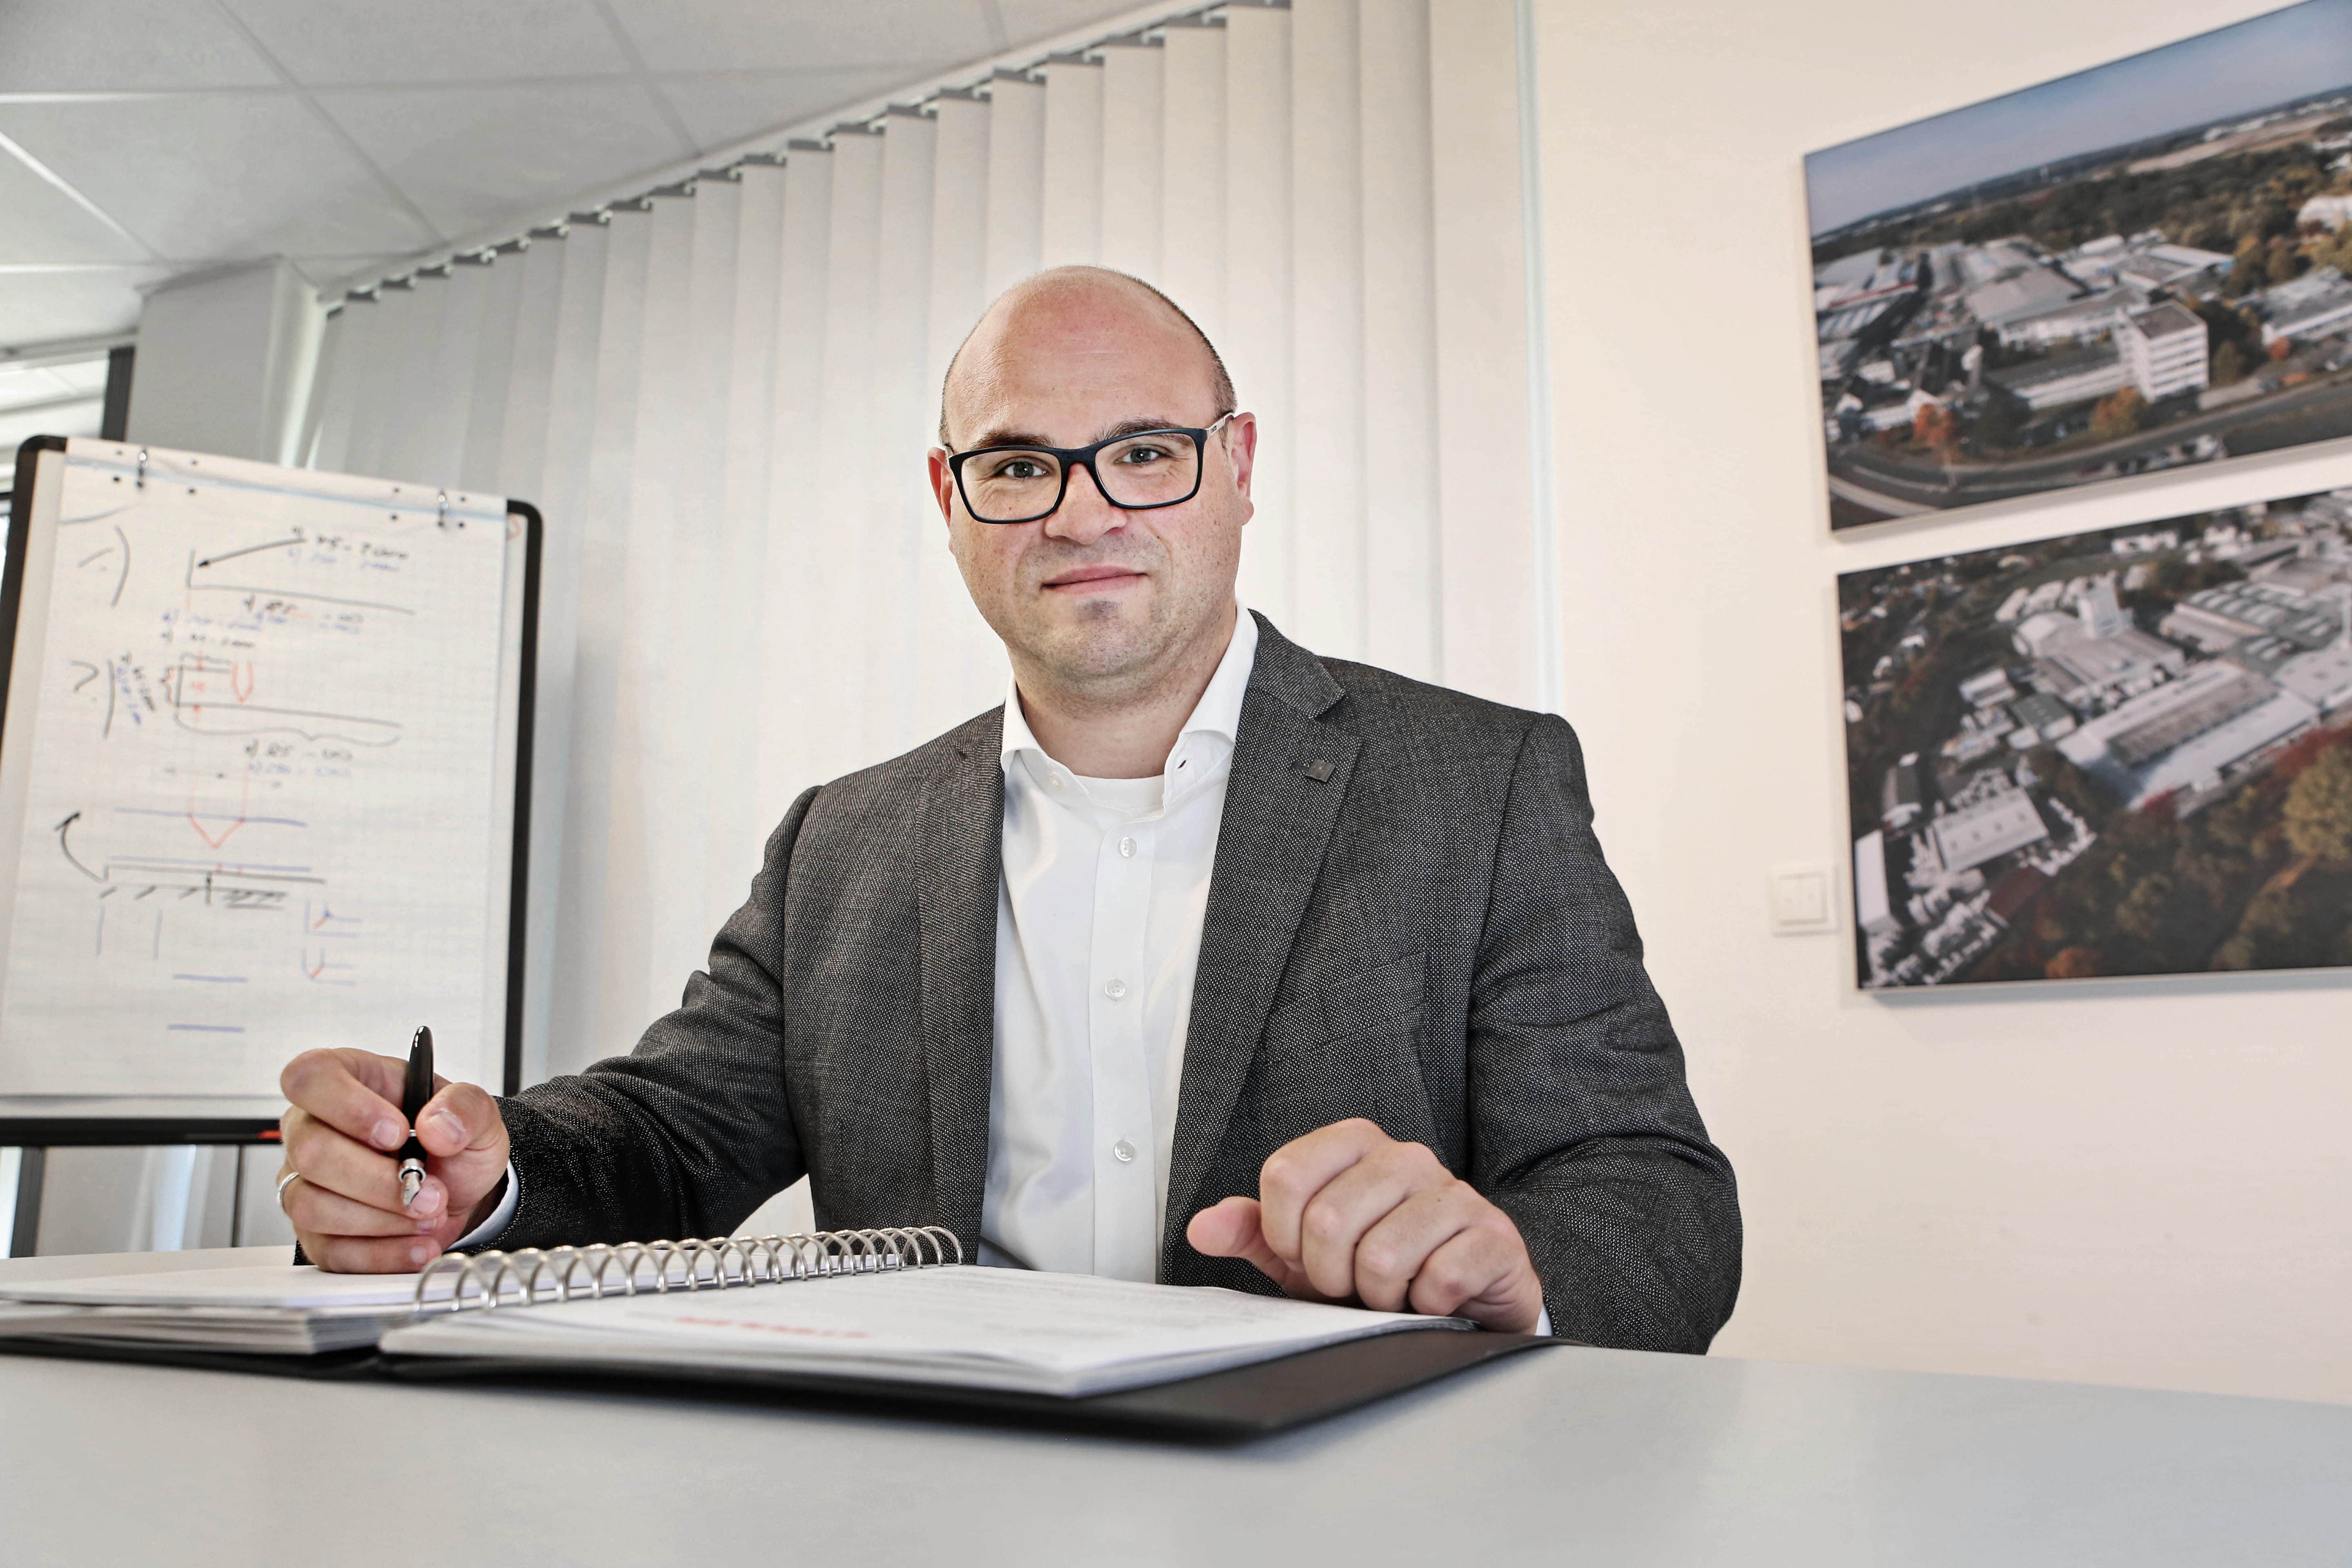 Markus Schmidt, Commercial Manager Subsidiaries at Steuler